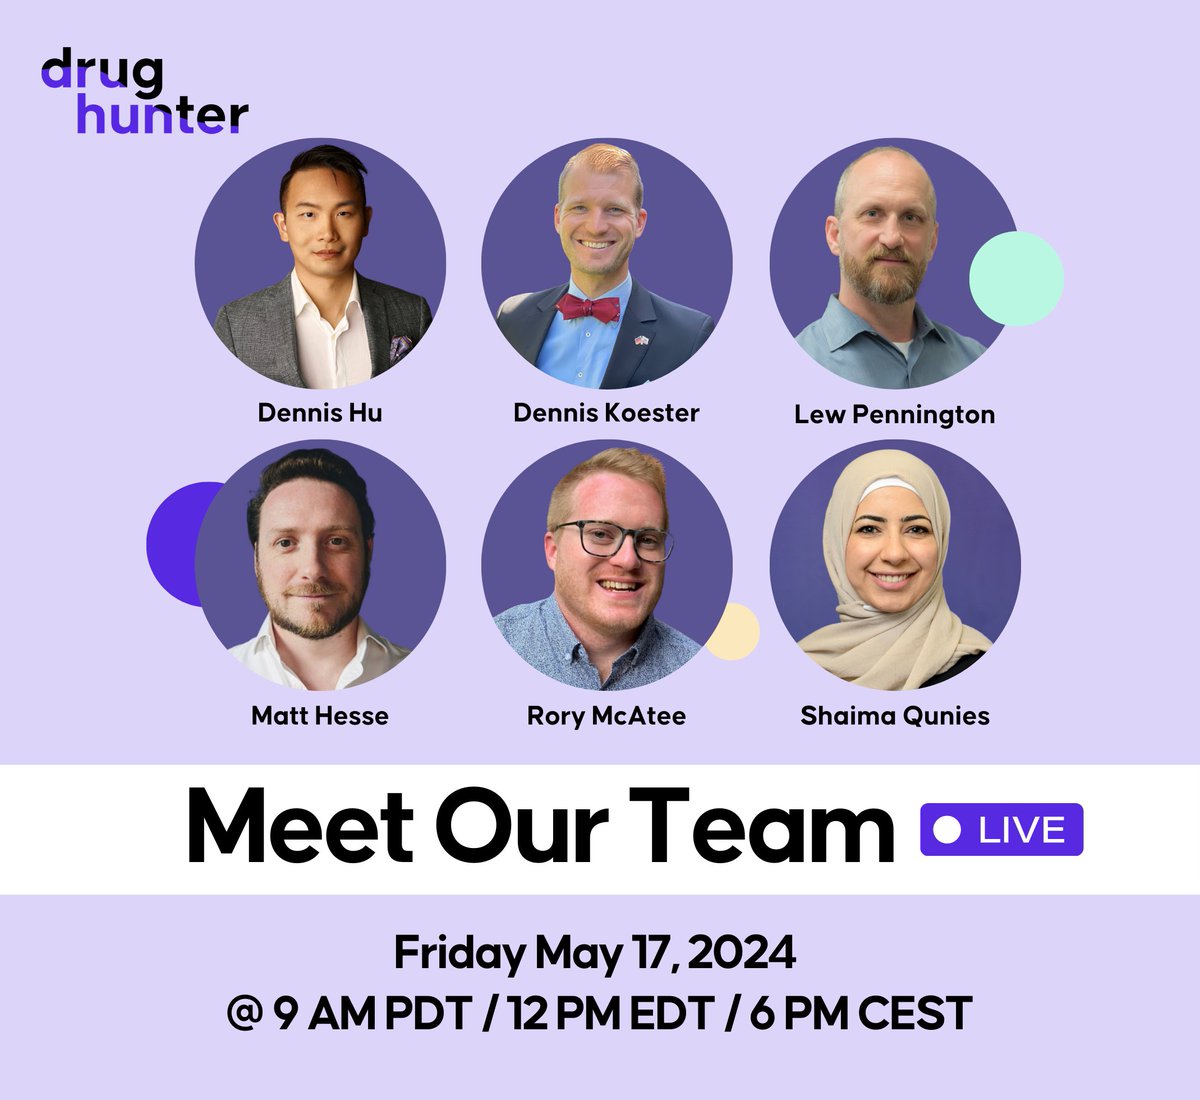 TODAY: Meet Our Team | drughunters.com/3V6hUUJ

Join us for a coffee chat this morning to meet scientists at Drug Hunter, hear what the team is excited about in drug discovery, and get a chance to ask them questions!

Friday, May 17
9:00am PDT/12:00 am EDT/6:00 pm CEST